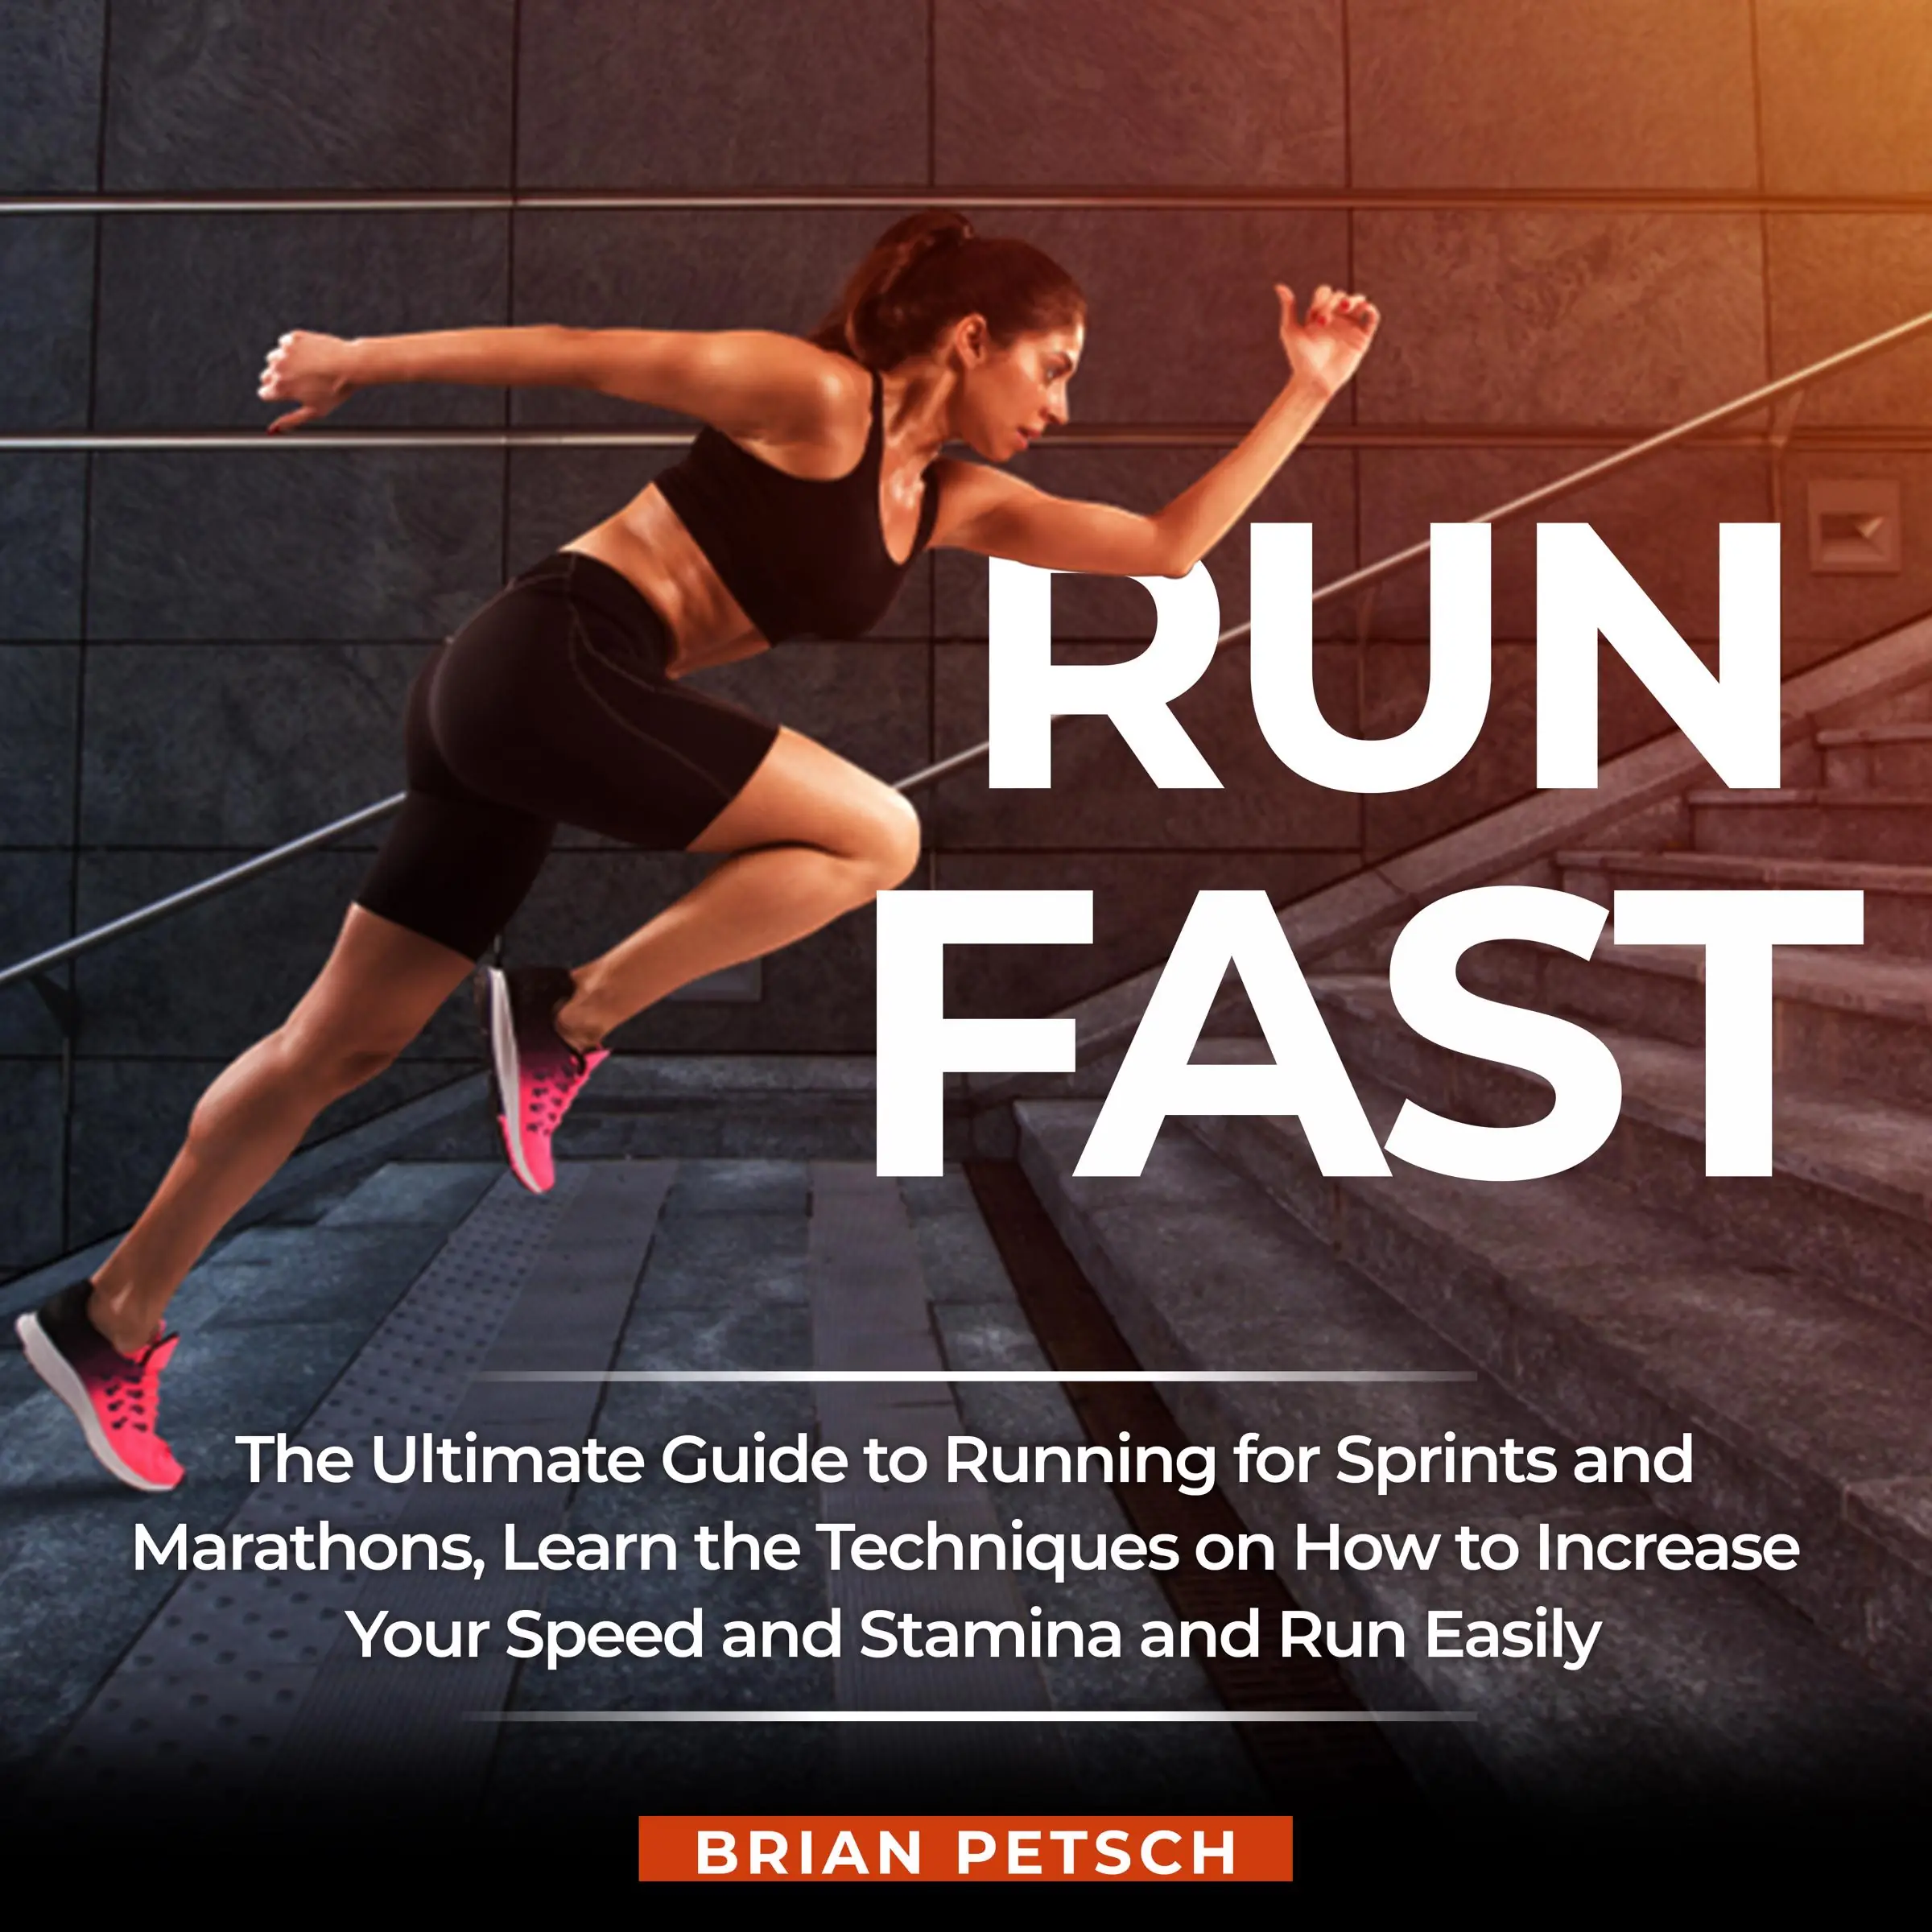 Run Fast: The Ultimate Guide to Running for Sprints and Marathons, Learn the Techniques on How to Increase Your Speed and Stamina and Run Easily by Brian Petsch Audiobook